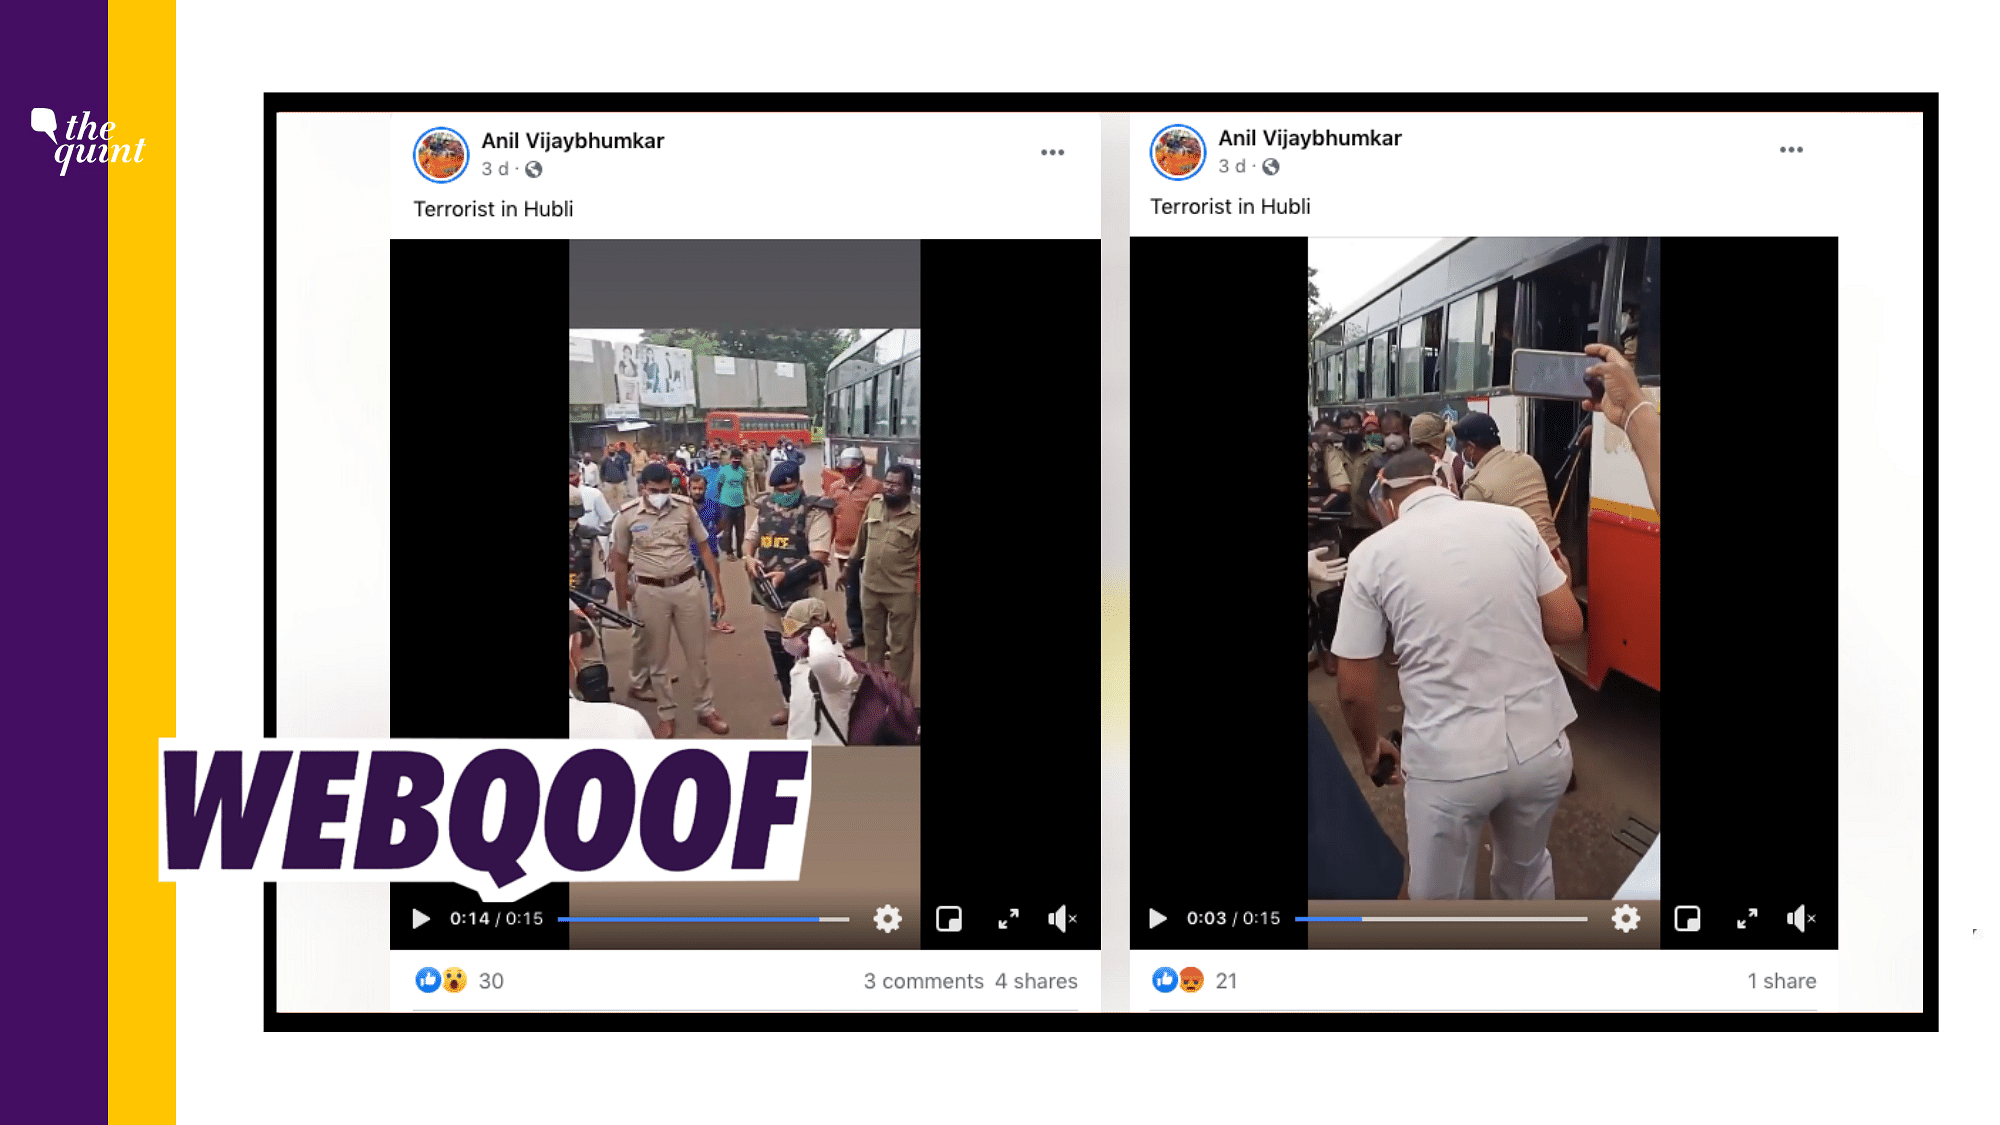 A video of cops surrounding a man at a bus stand is being shared with the claim that it shows terrorists in Hubli.